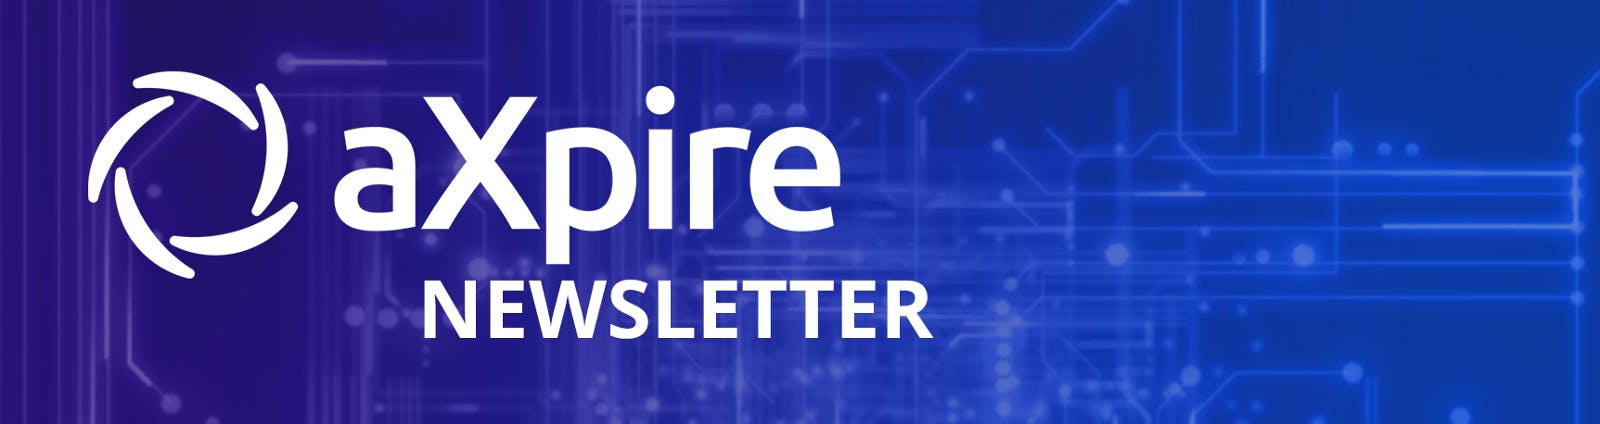 /axpire-newsletter-august-2018-6a800ae81459 feature image